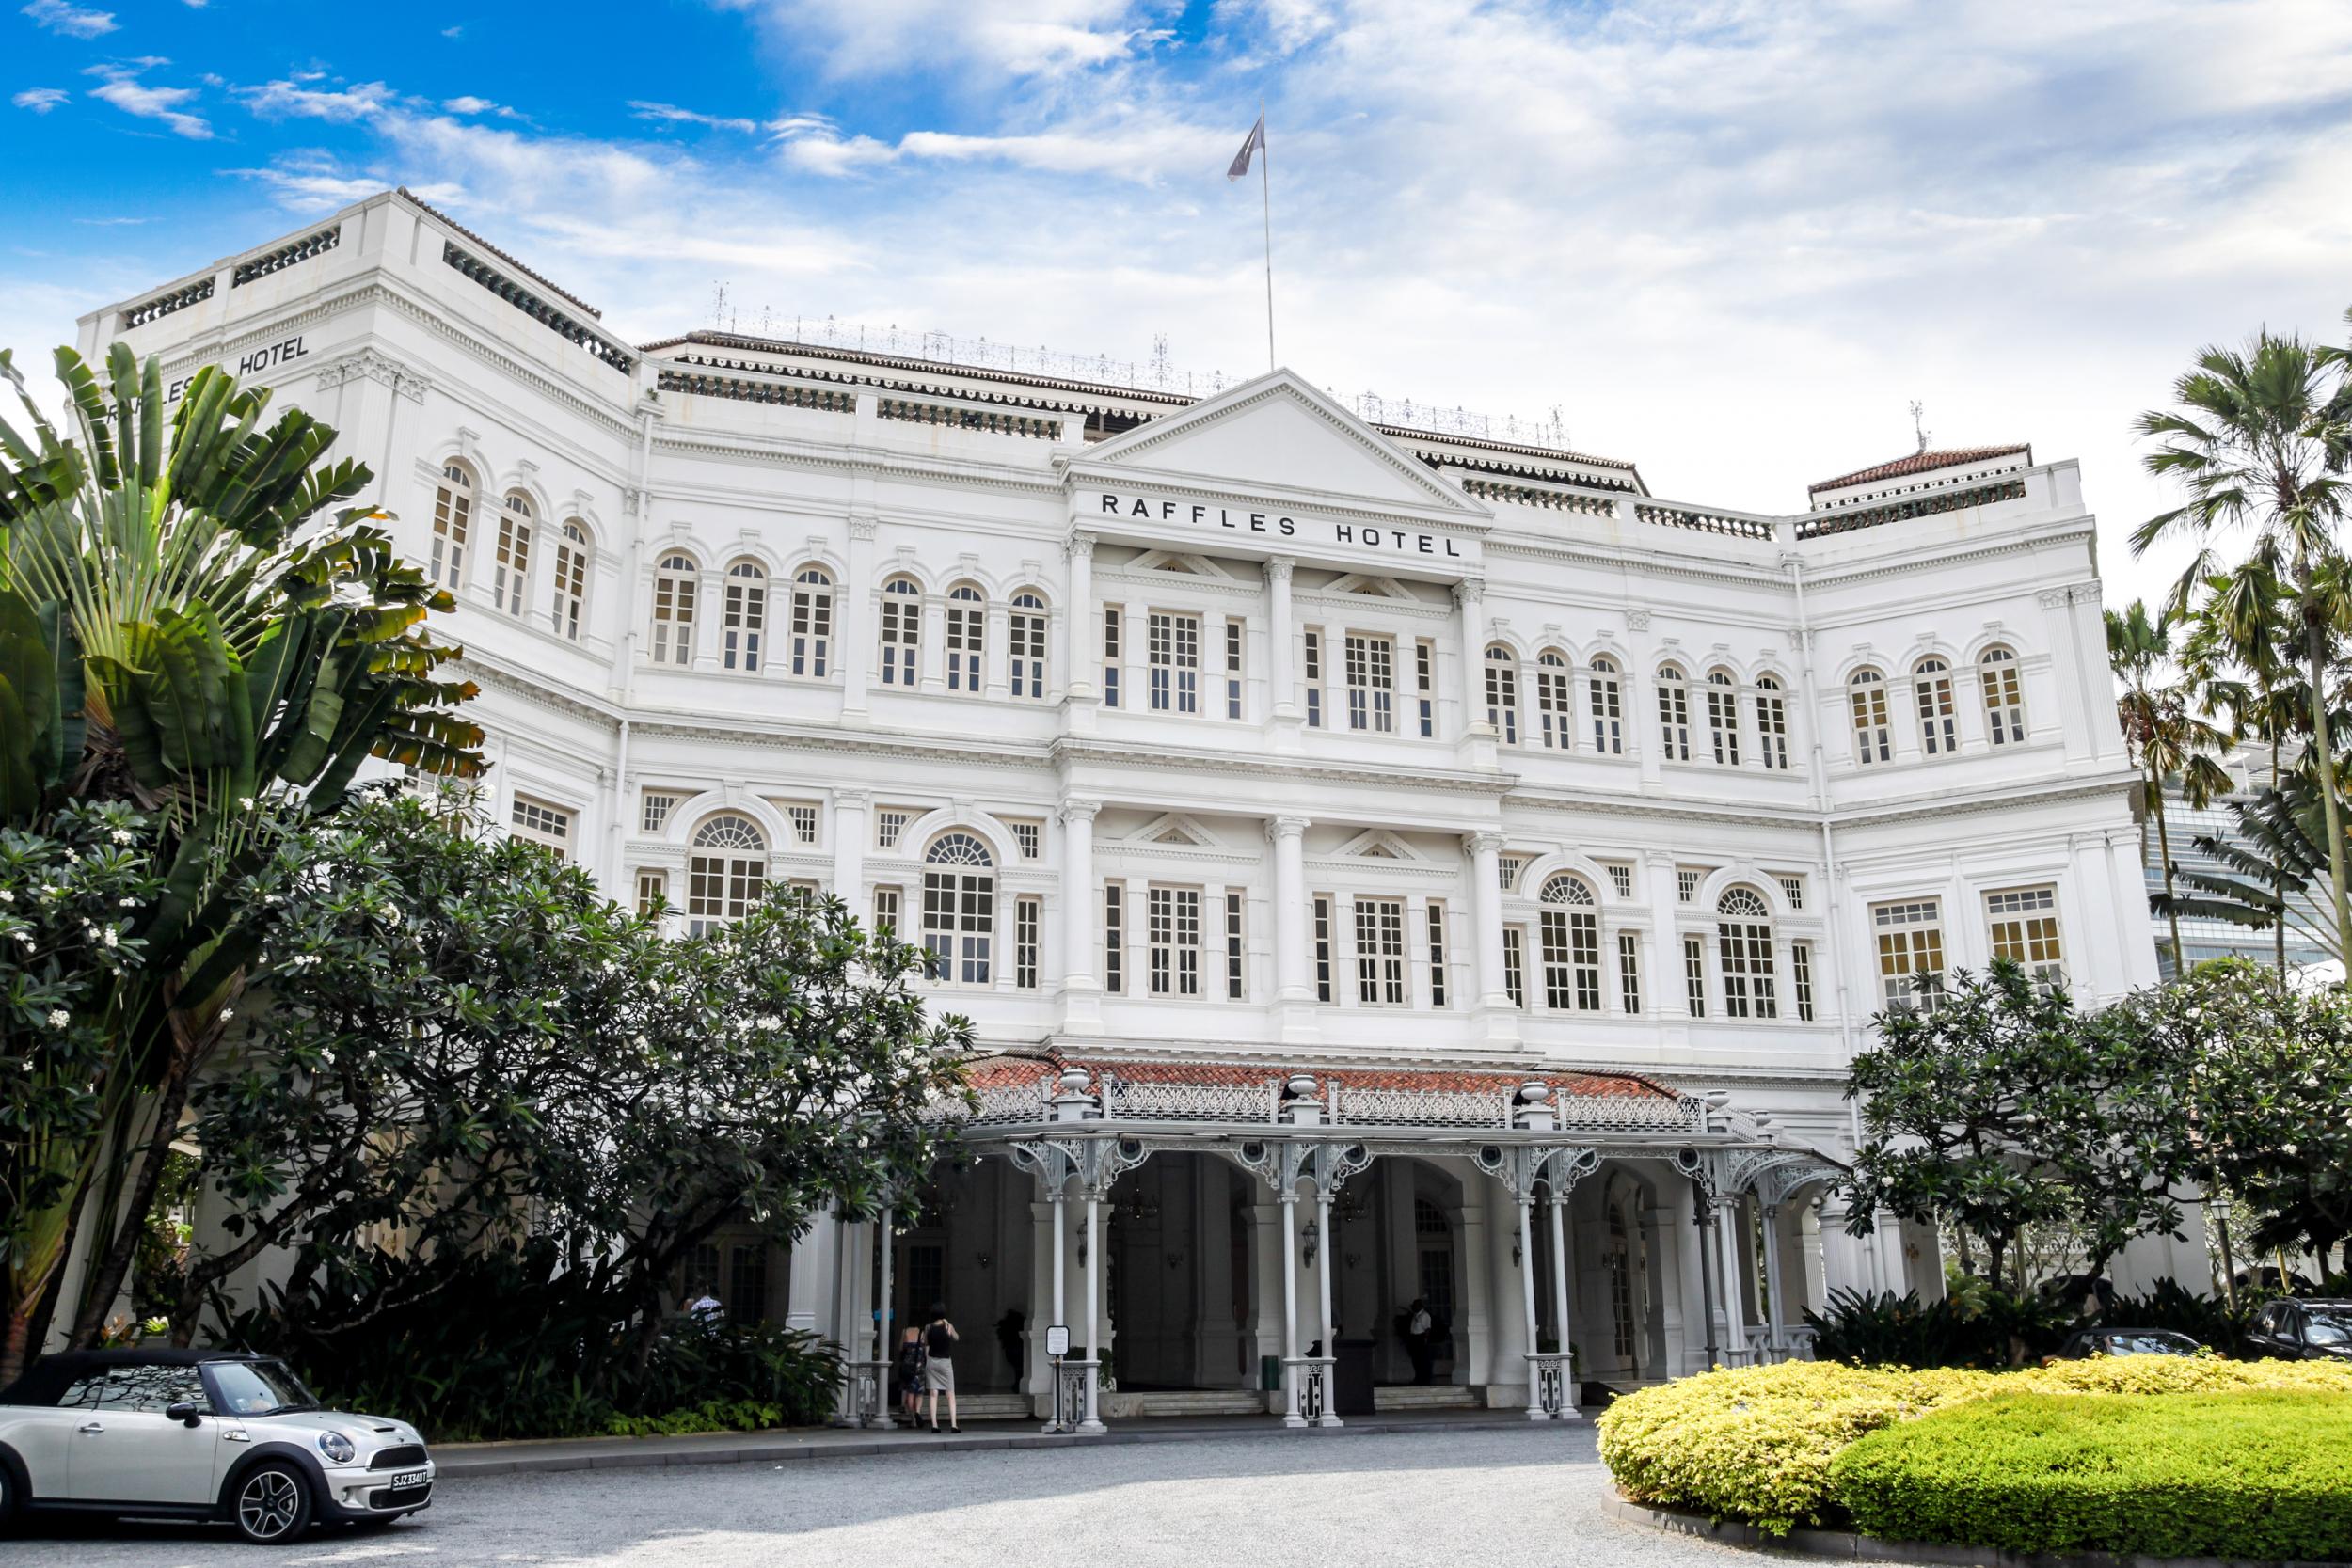 Raffles Singapore: birthplace of the Singapore Sling cocktail